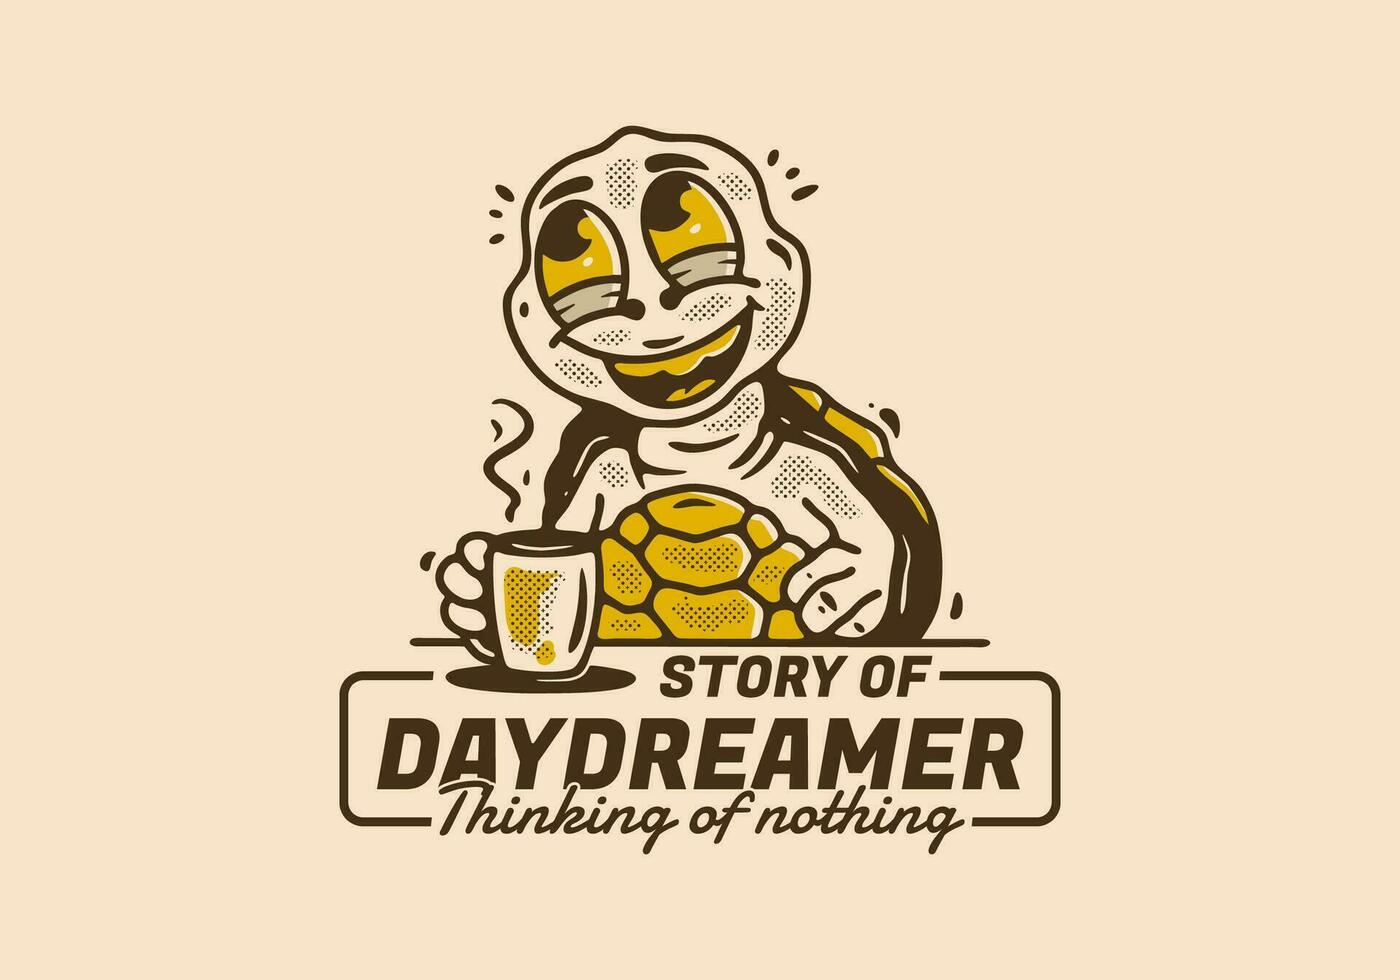 Daydreamer thinking of nothing, mascot character of turtle drink a coffee while daydreaming vector